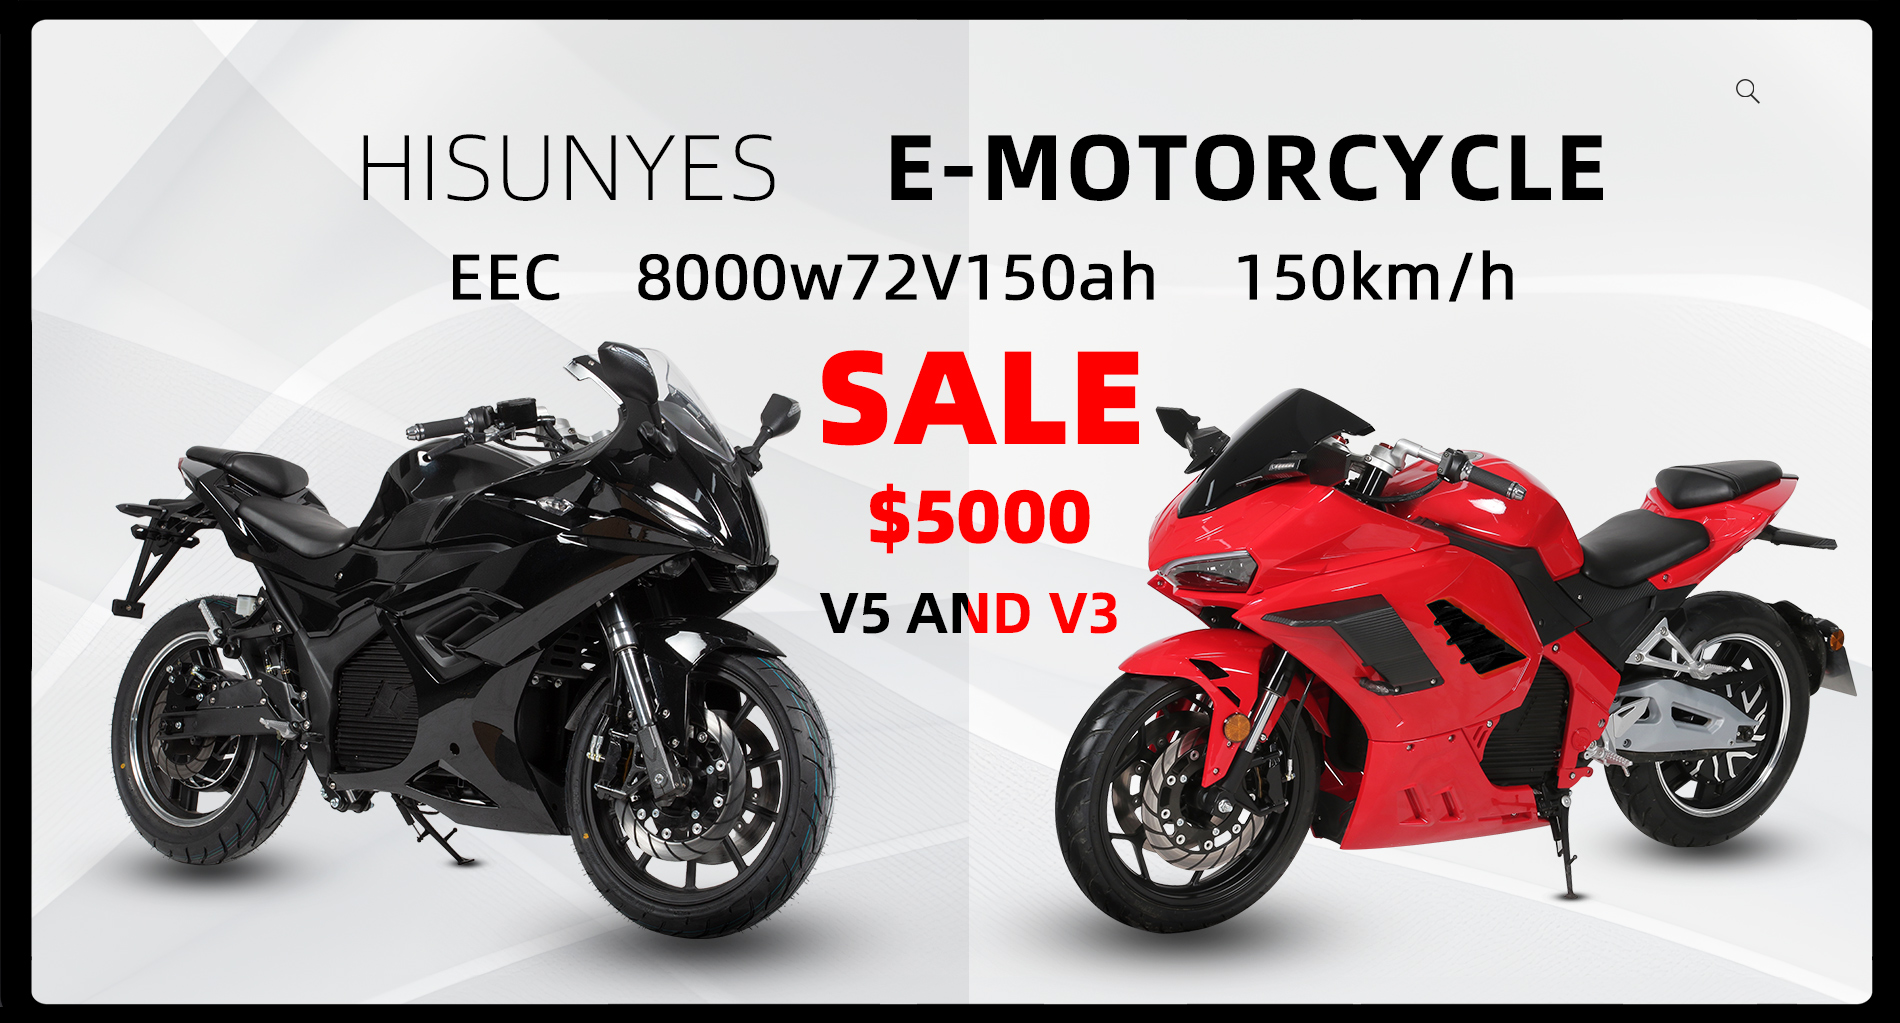 The fastest electric motorcycle V3 and V5 are on big sale